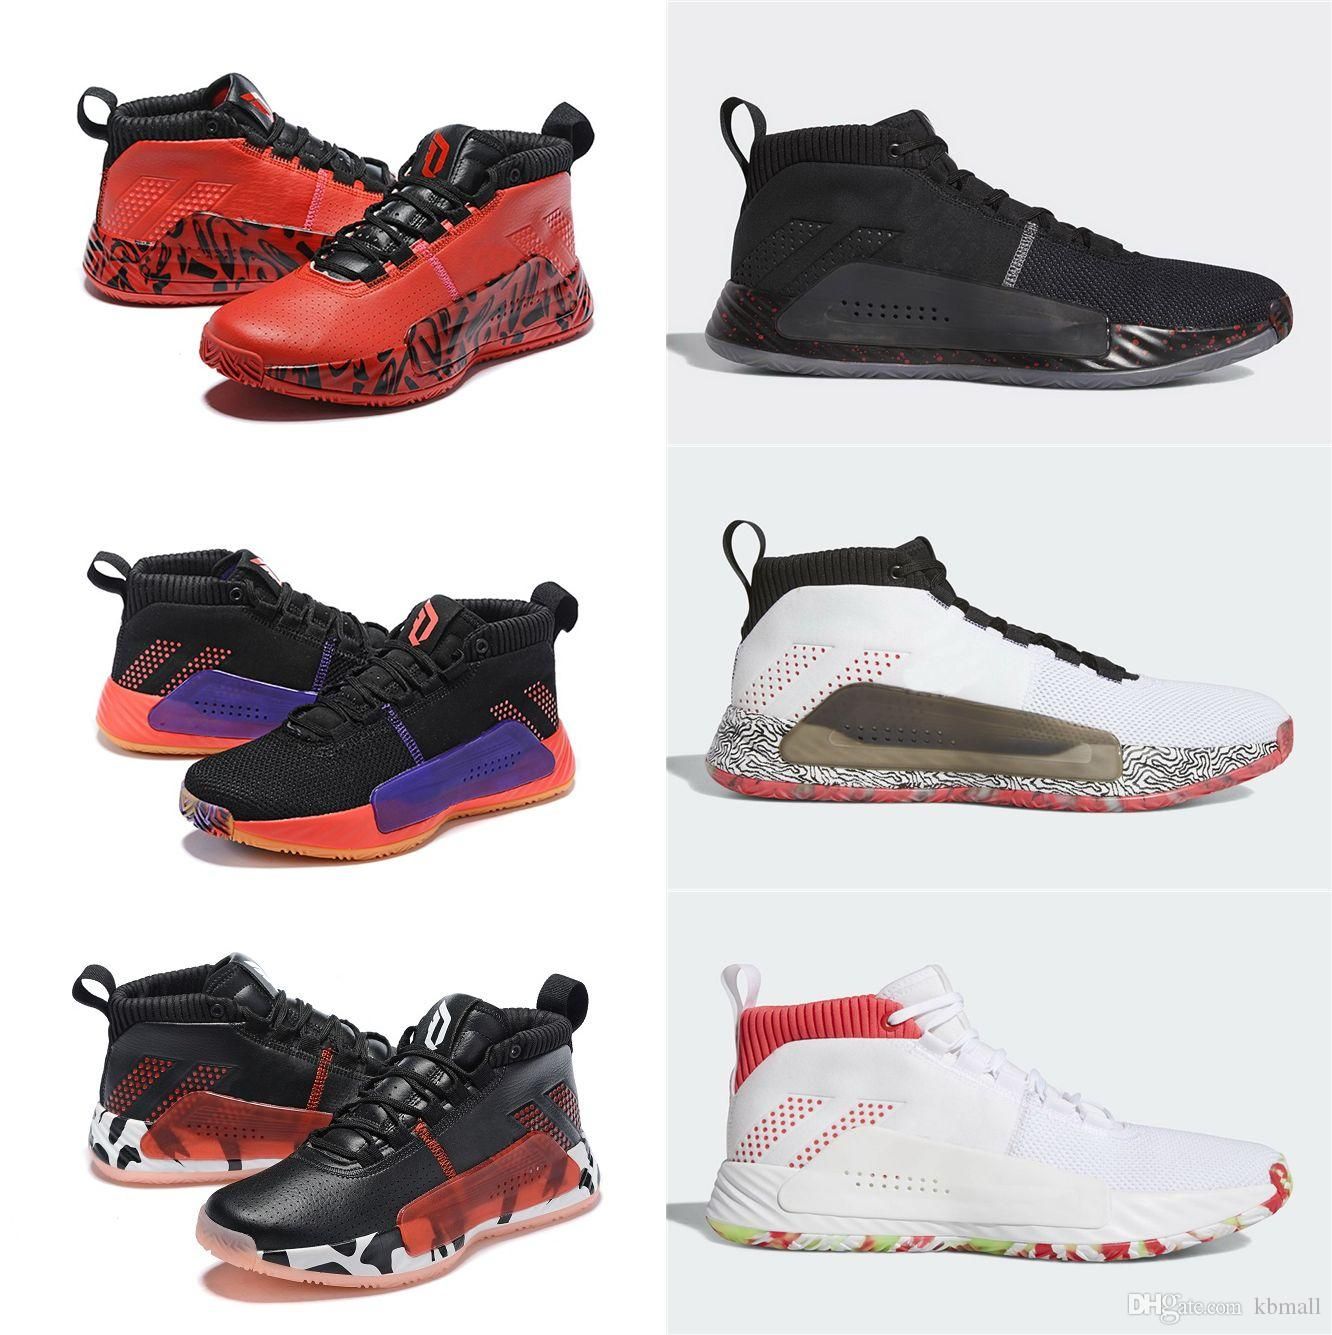 Peoples Champ Shoes For Sales 2019 